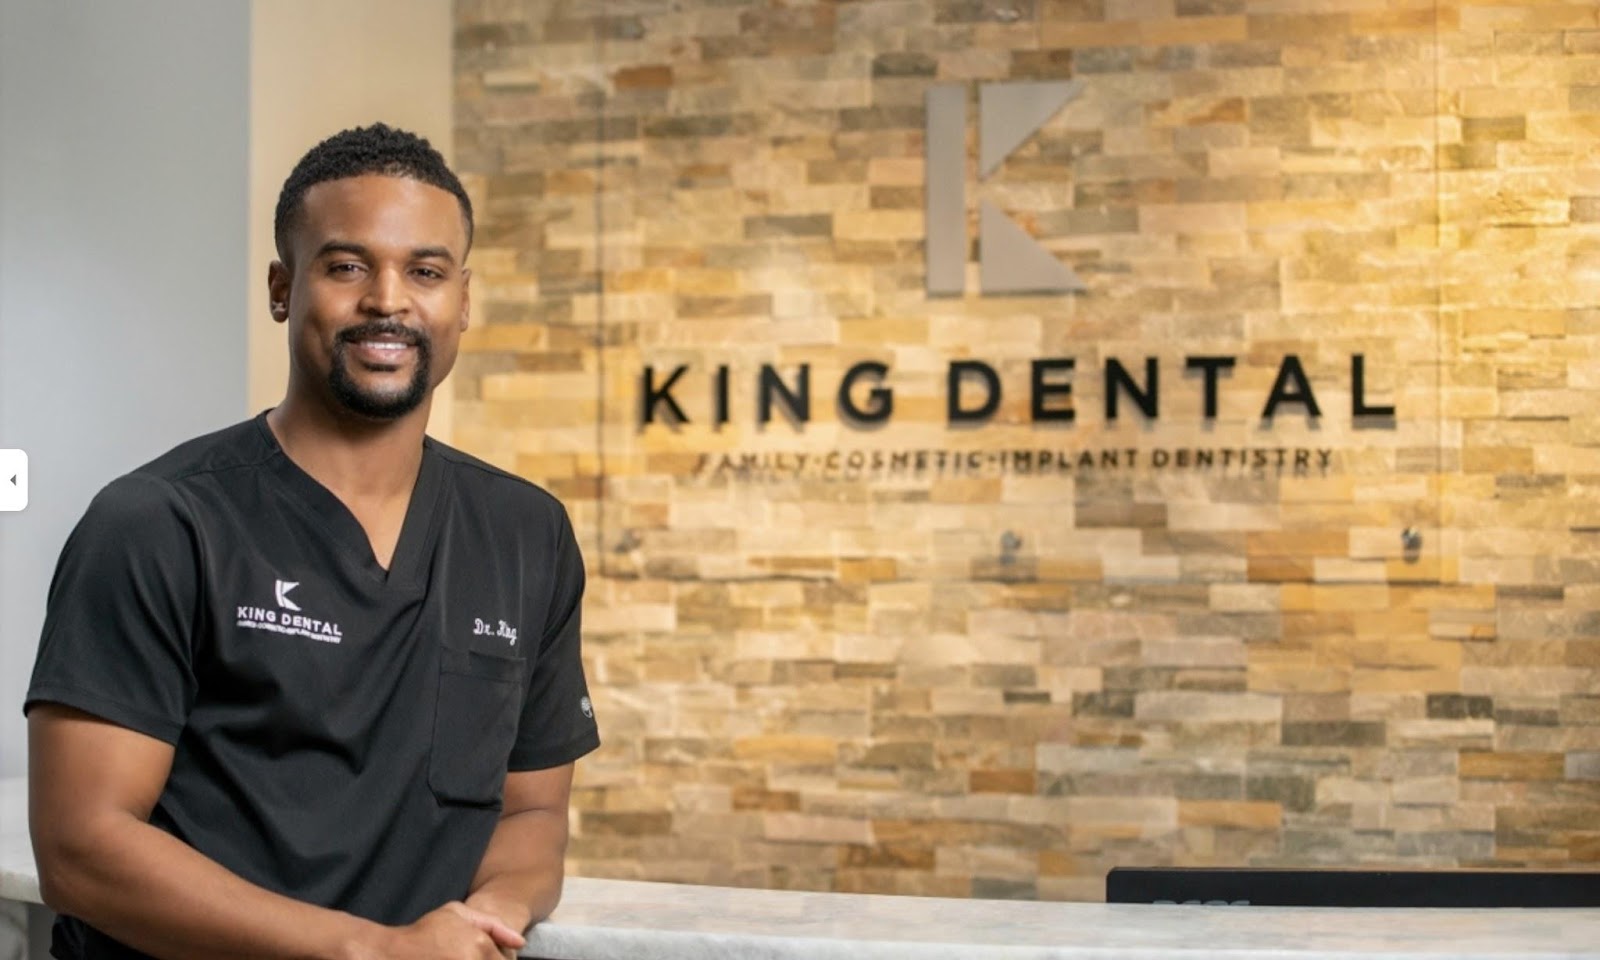 David King, DMD from King Dental is a top dentist in Huntsville, AL, popular as a gentle and caring dentist passionate about delivering modern dental solutions.